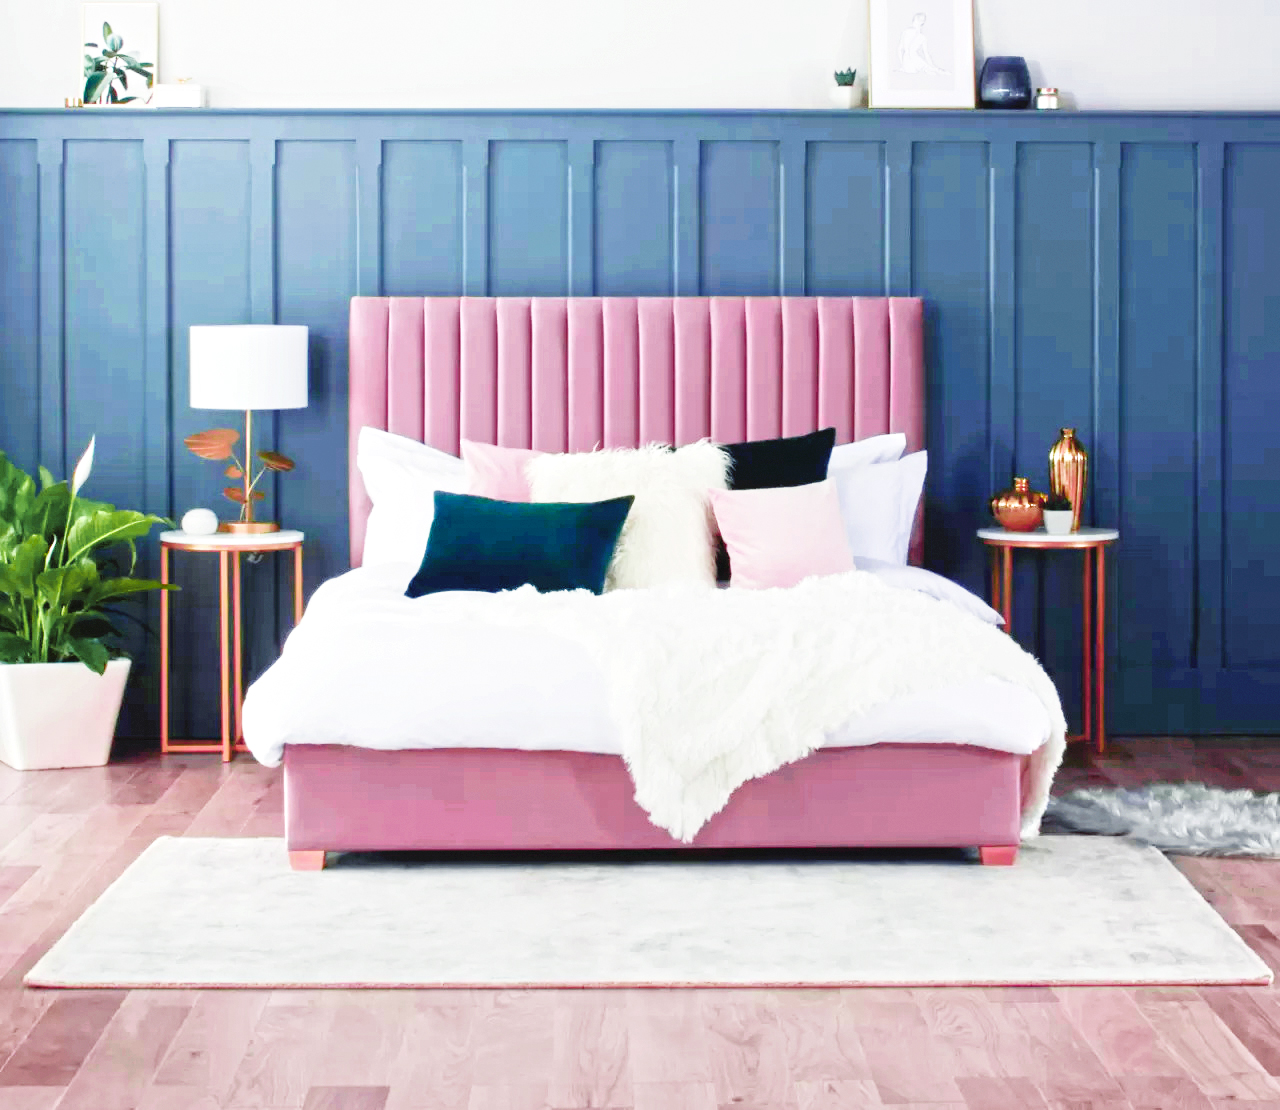 blue-and-pink-bedroom-design ideas